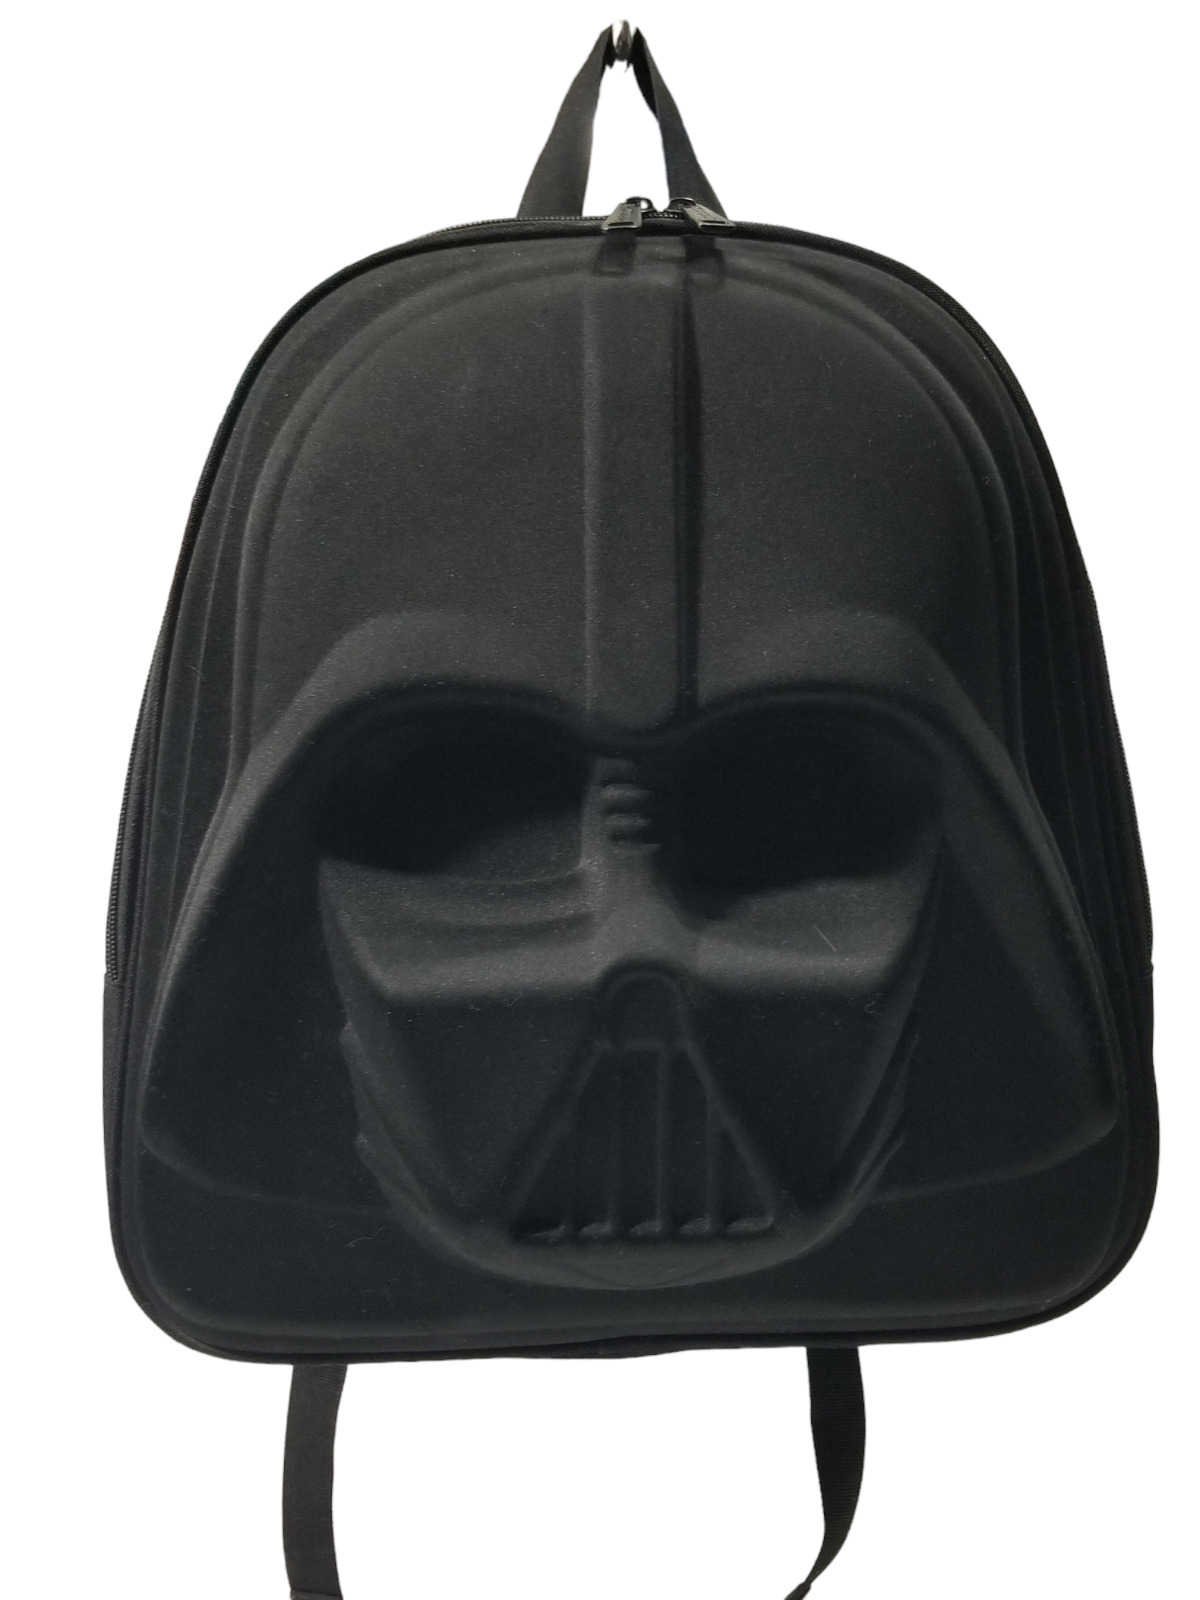 Loungefly Star Wars Darth Vader 3D Molded Backpack Black Dual Zip Entry